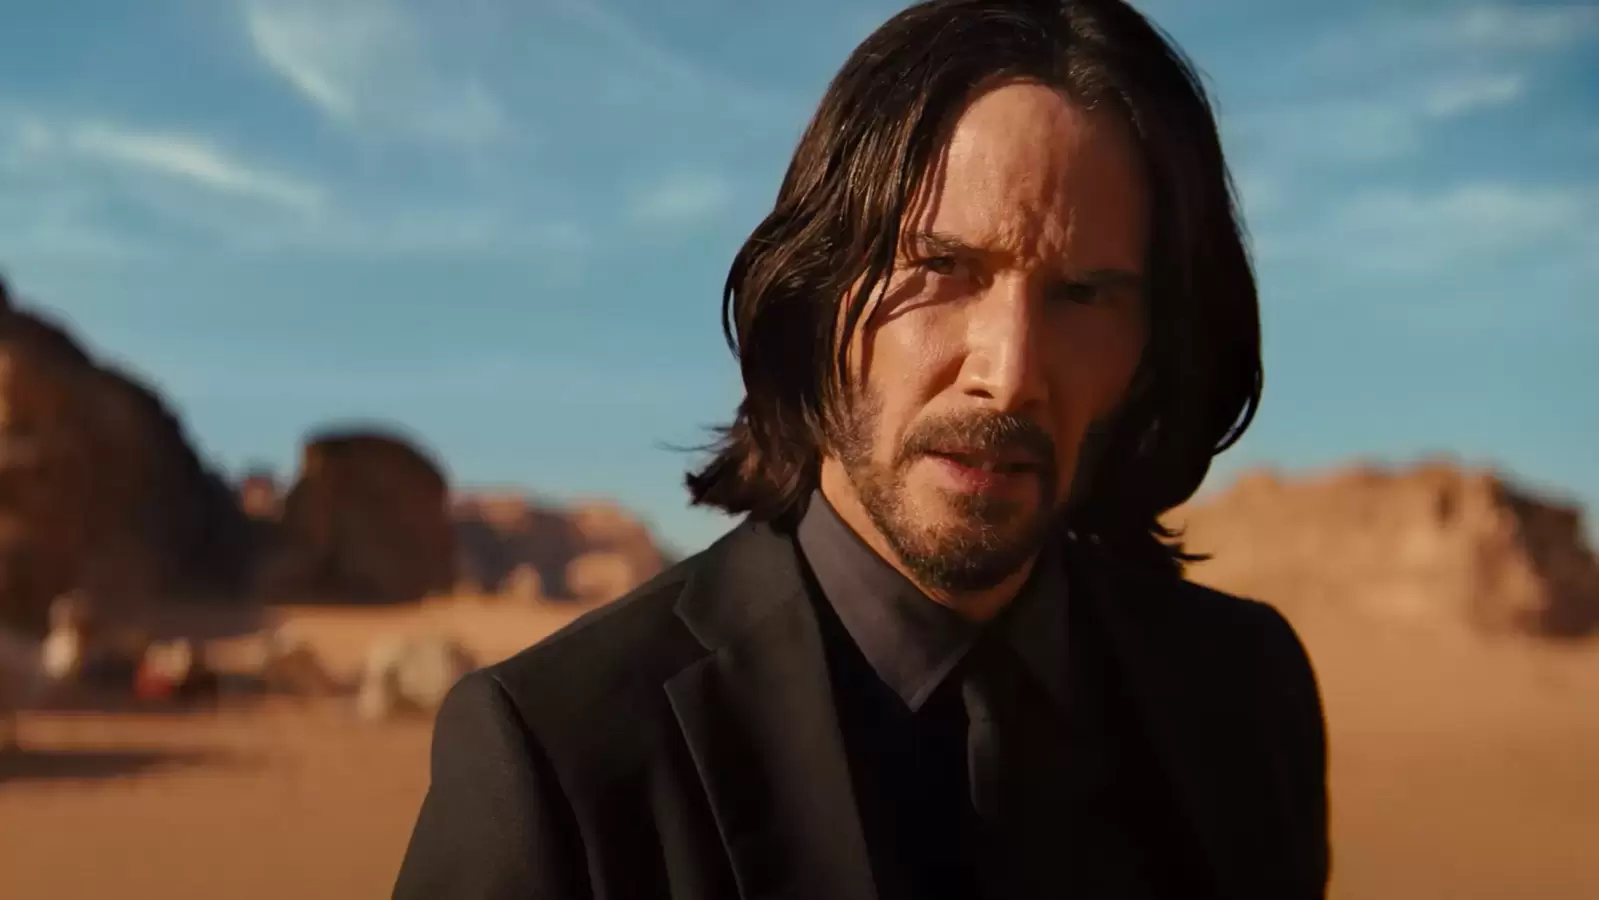 John Wick 4 would be an amazing finale, but is Chapter 5 in the works?